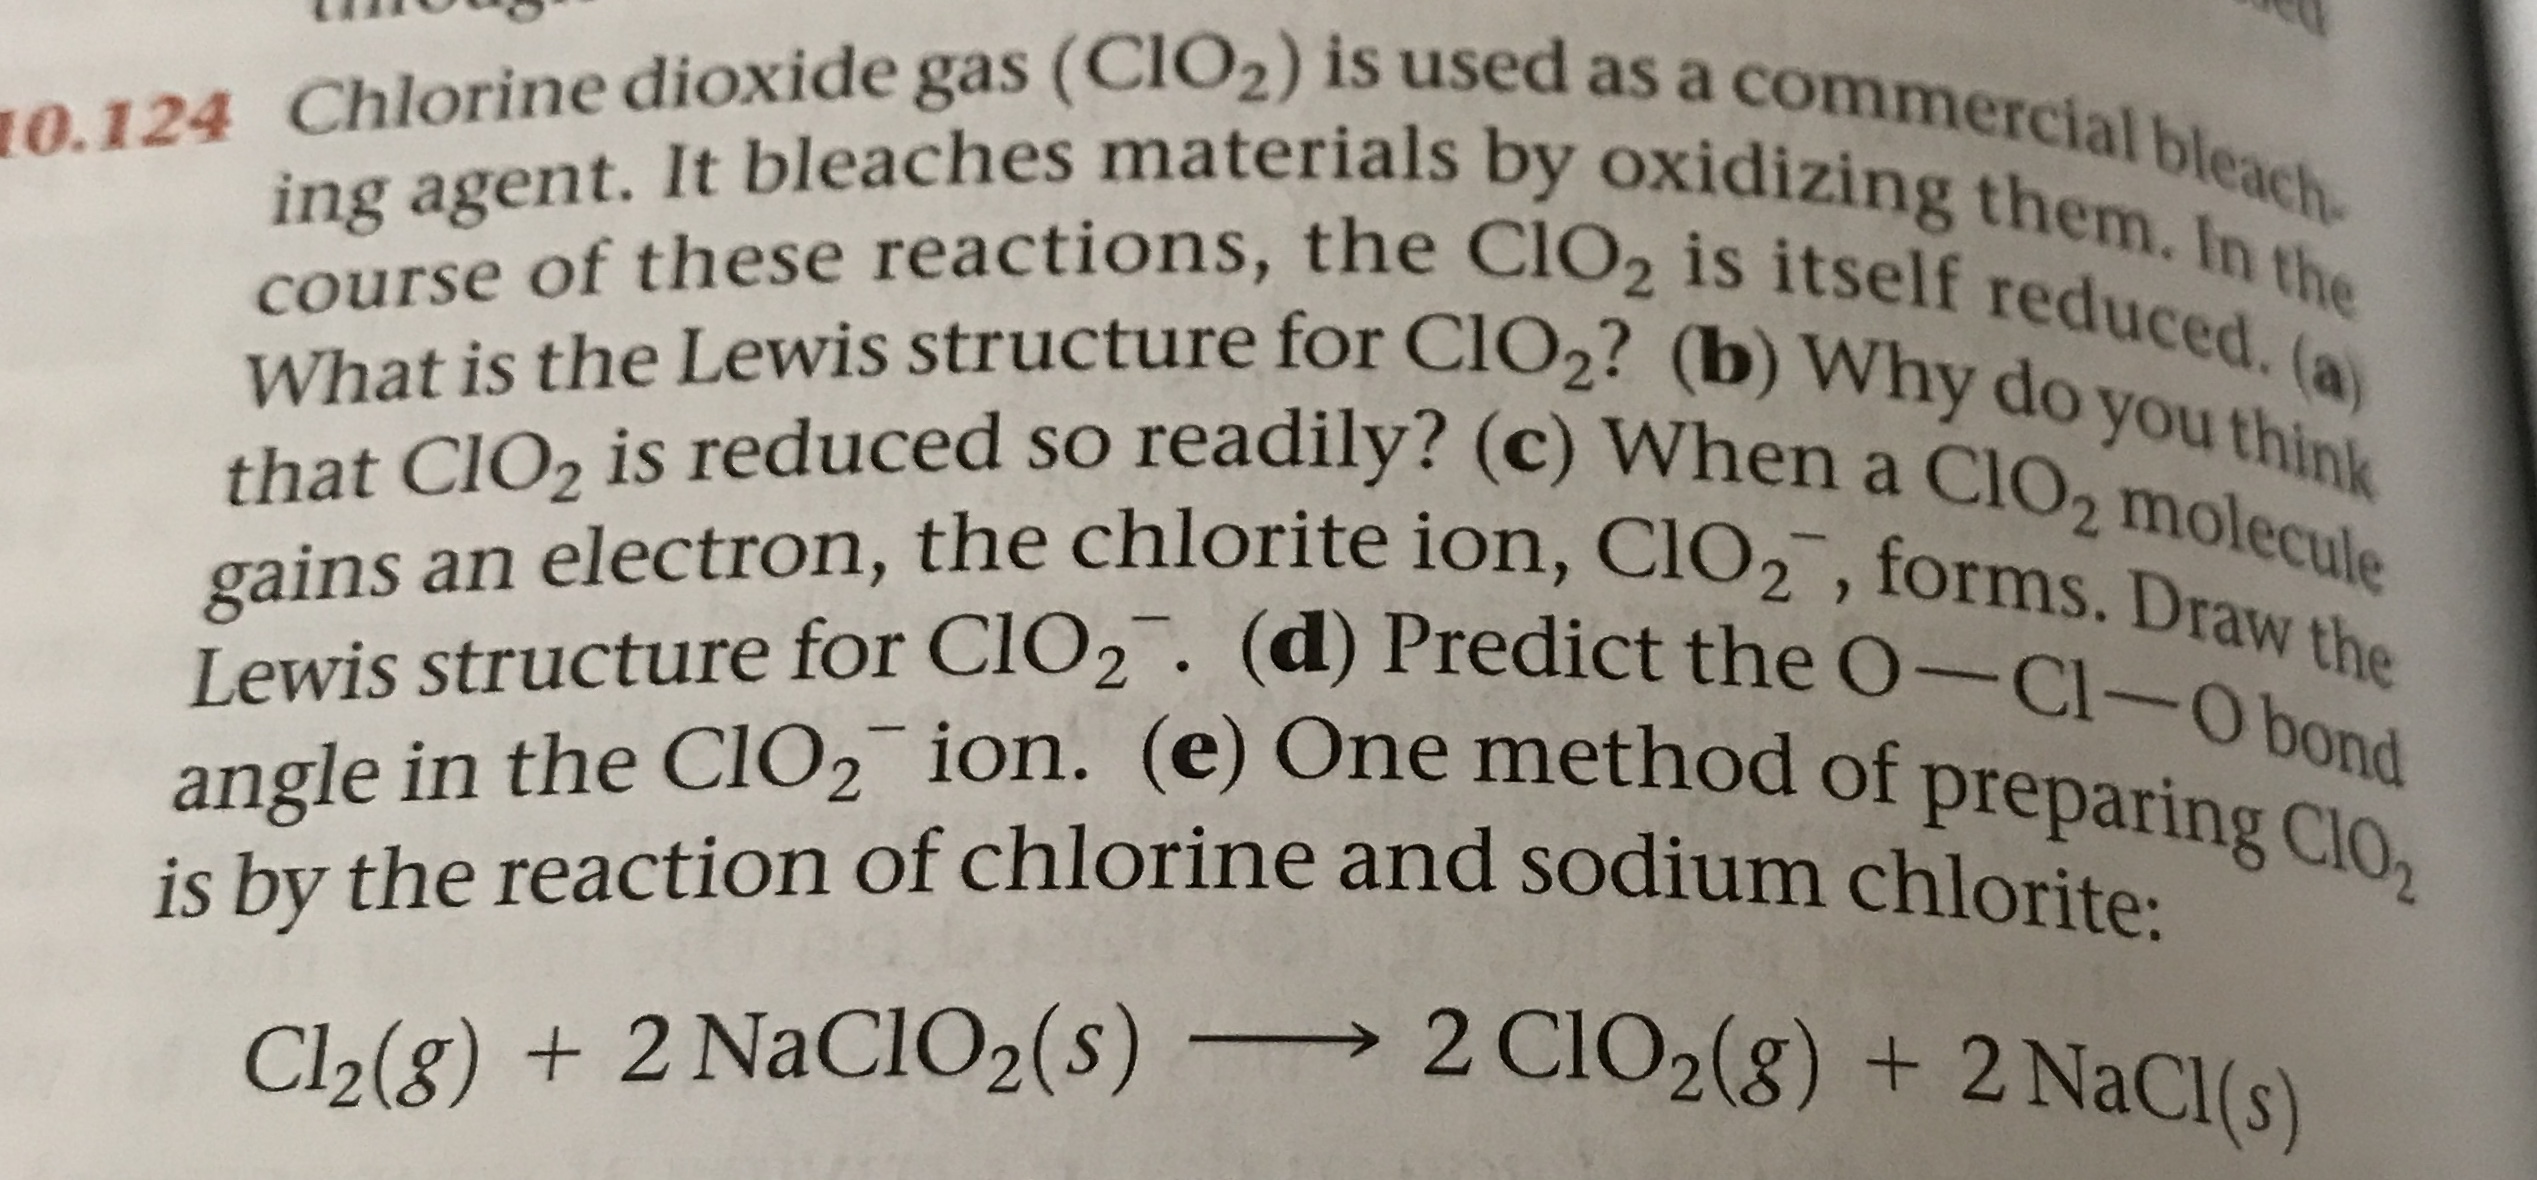 10.124 Chlorine dioxide gas (CIO2) is used as a commercial bleach-
ing agent. It bleaches materials by oxidizing them. In the
course of these reactions, the CIO2 is itself reduced. (a)
What is the Lewis structure for CLO2? (b) Why do you think
that CIO2 is reduced so readily? (c) When a CIO2 molecule
gains an electron, the chlorite ion, ClO2, forms. Draw the
Lewis structure for CLO2. (d) Predict the O-Cl-Obond
angle in the CIO2 ion. (e) One method of preparing ClO2
is by the reaction of chlorine and sodium chlorite
2 CIO2(8) + 2NaCl(s)
Cl2(g) + 2 NaCIO2 (s) -
